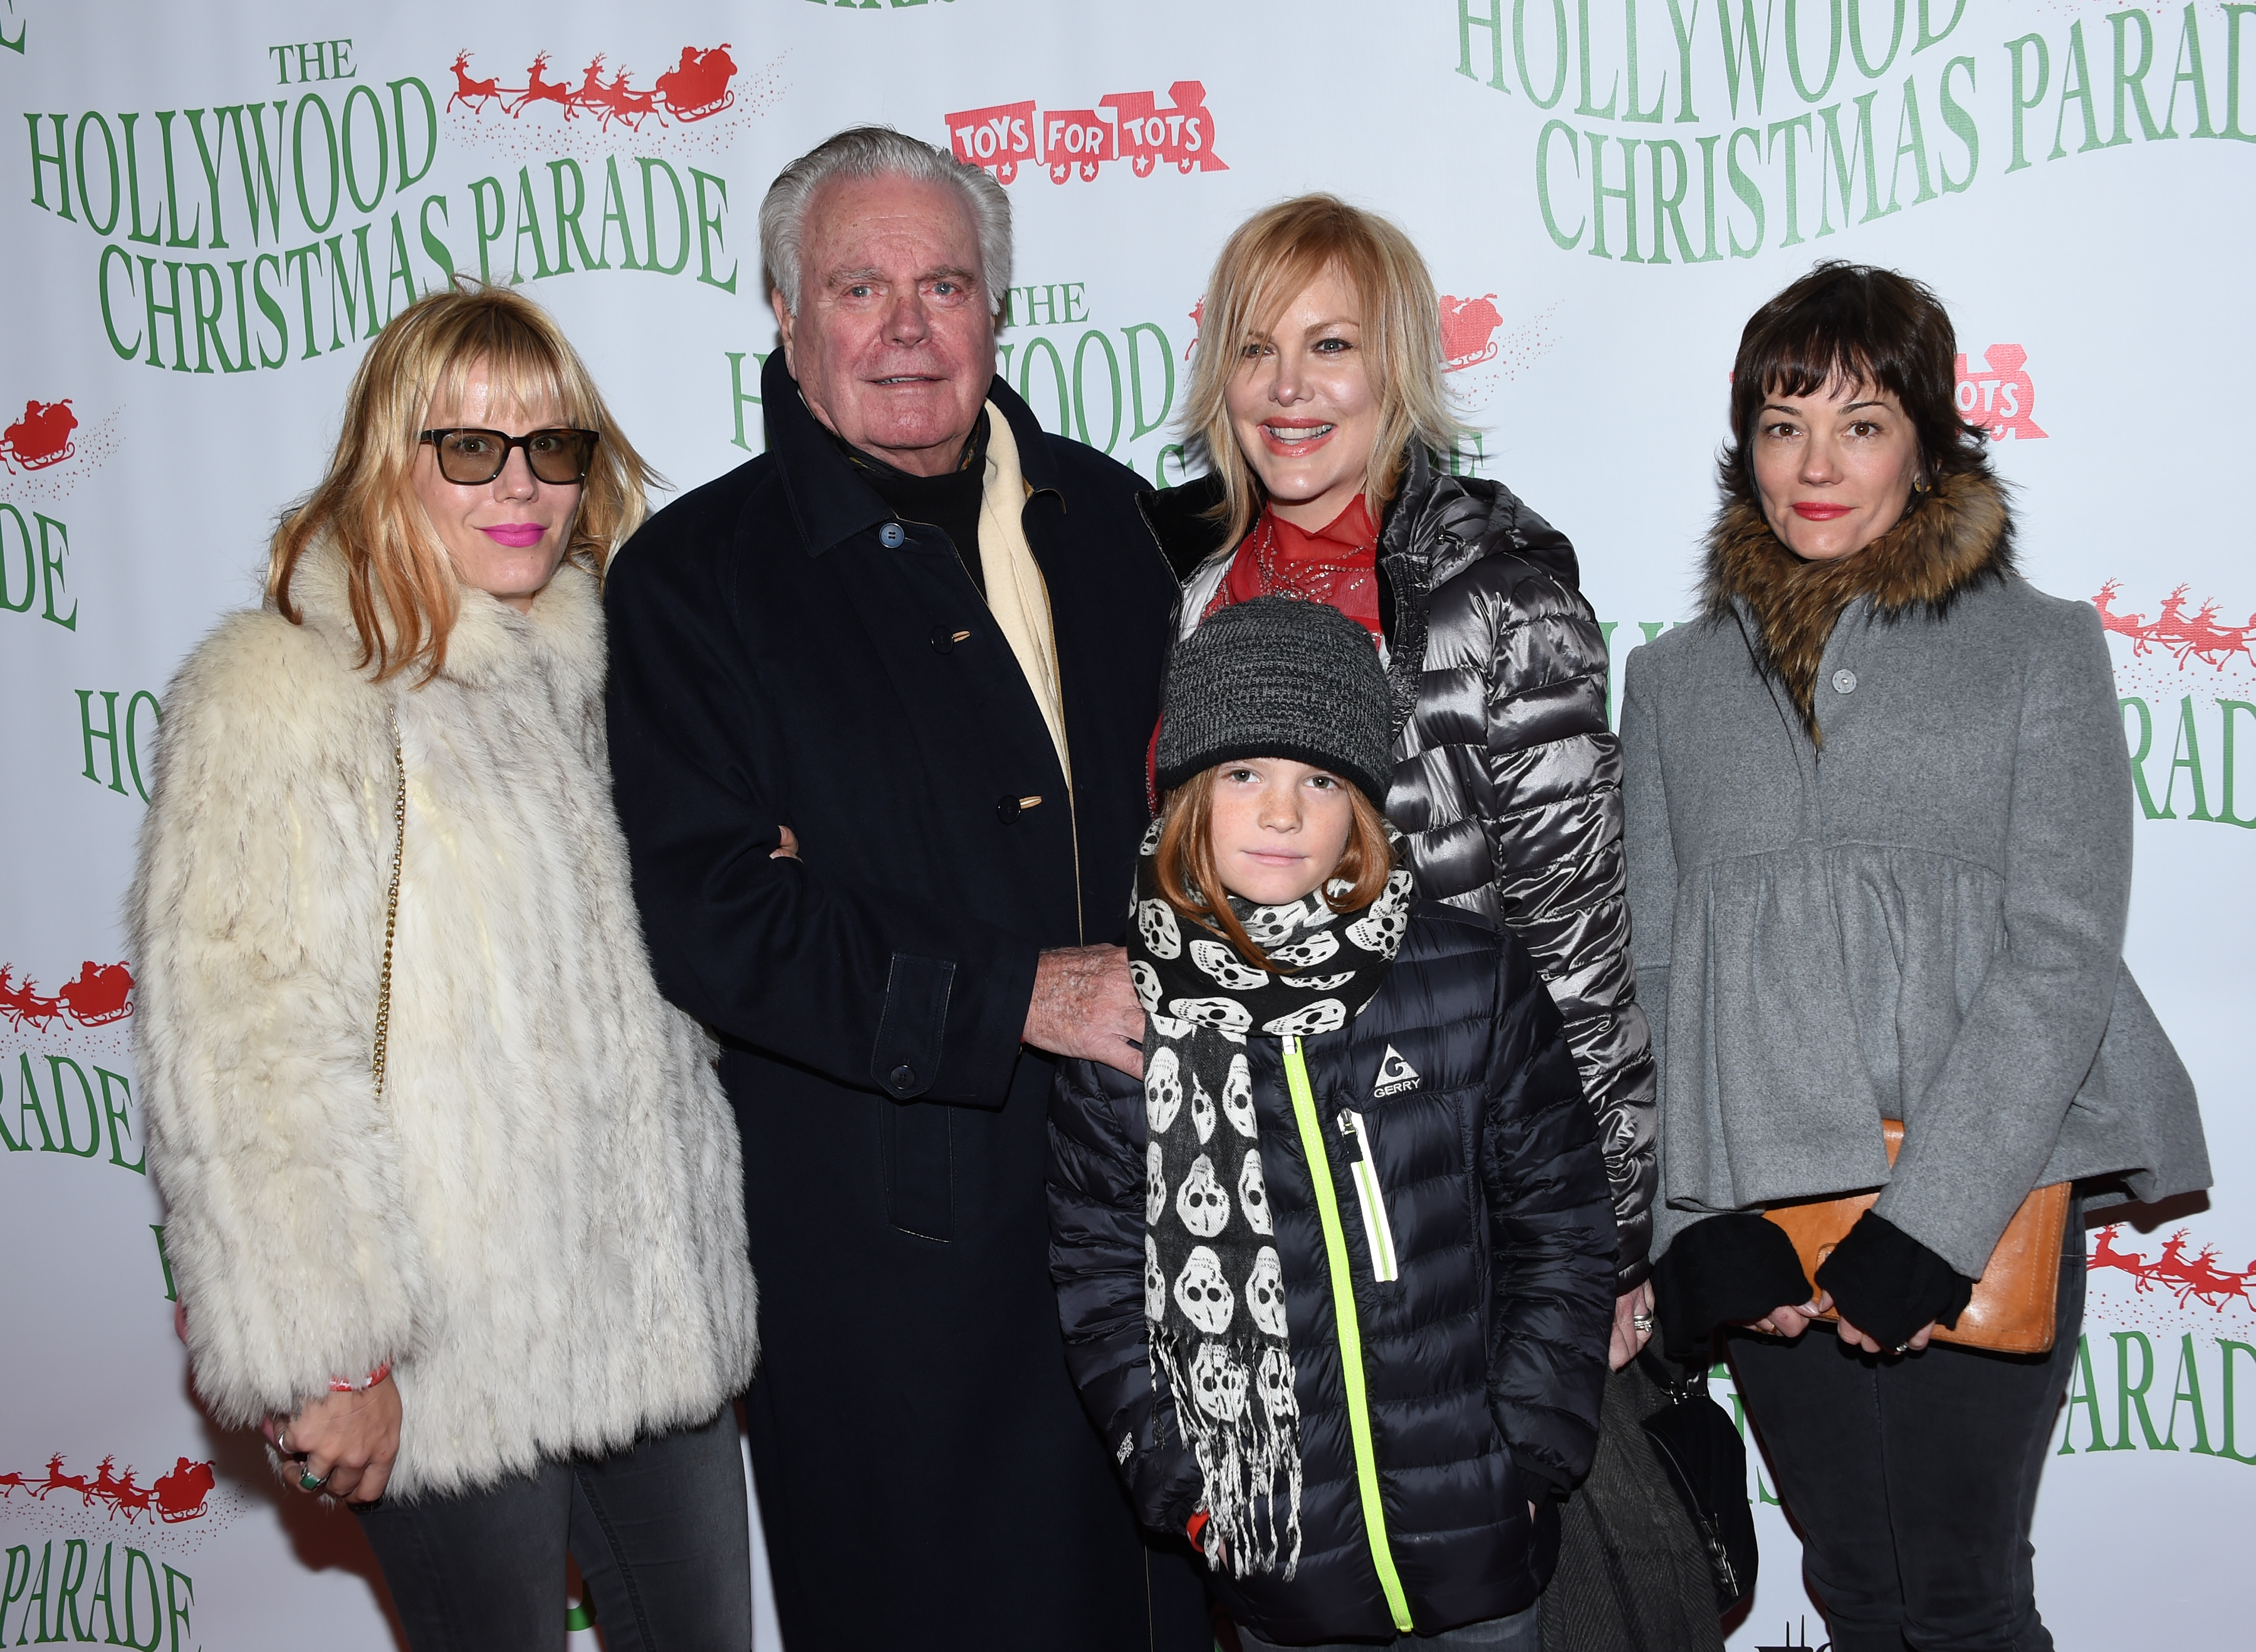 Robert Wagner with daughters and grandson arrive at the 85th annual Hollywood Christmas parade on Hollywood Boulevard in Hollywood, on November 27, 2016. | Source: Getty Images